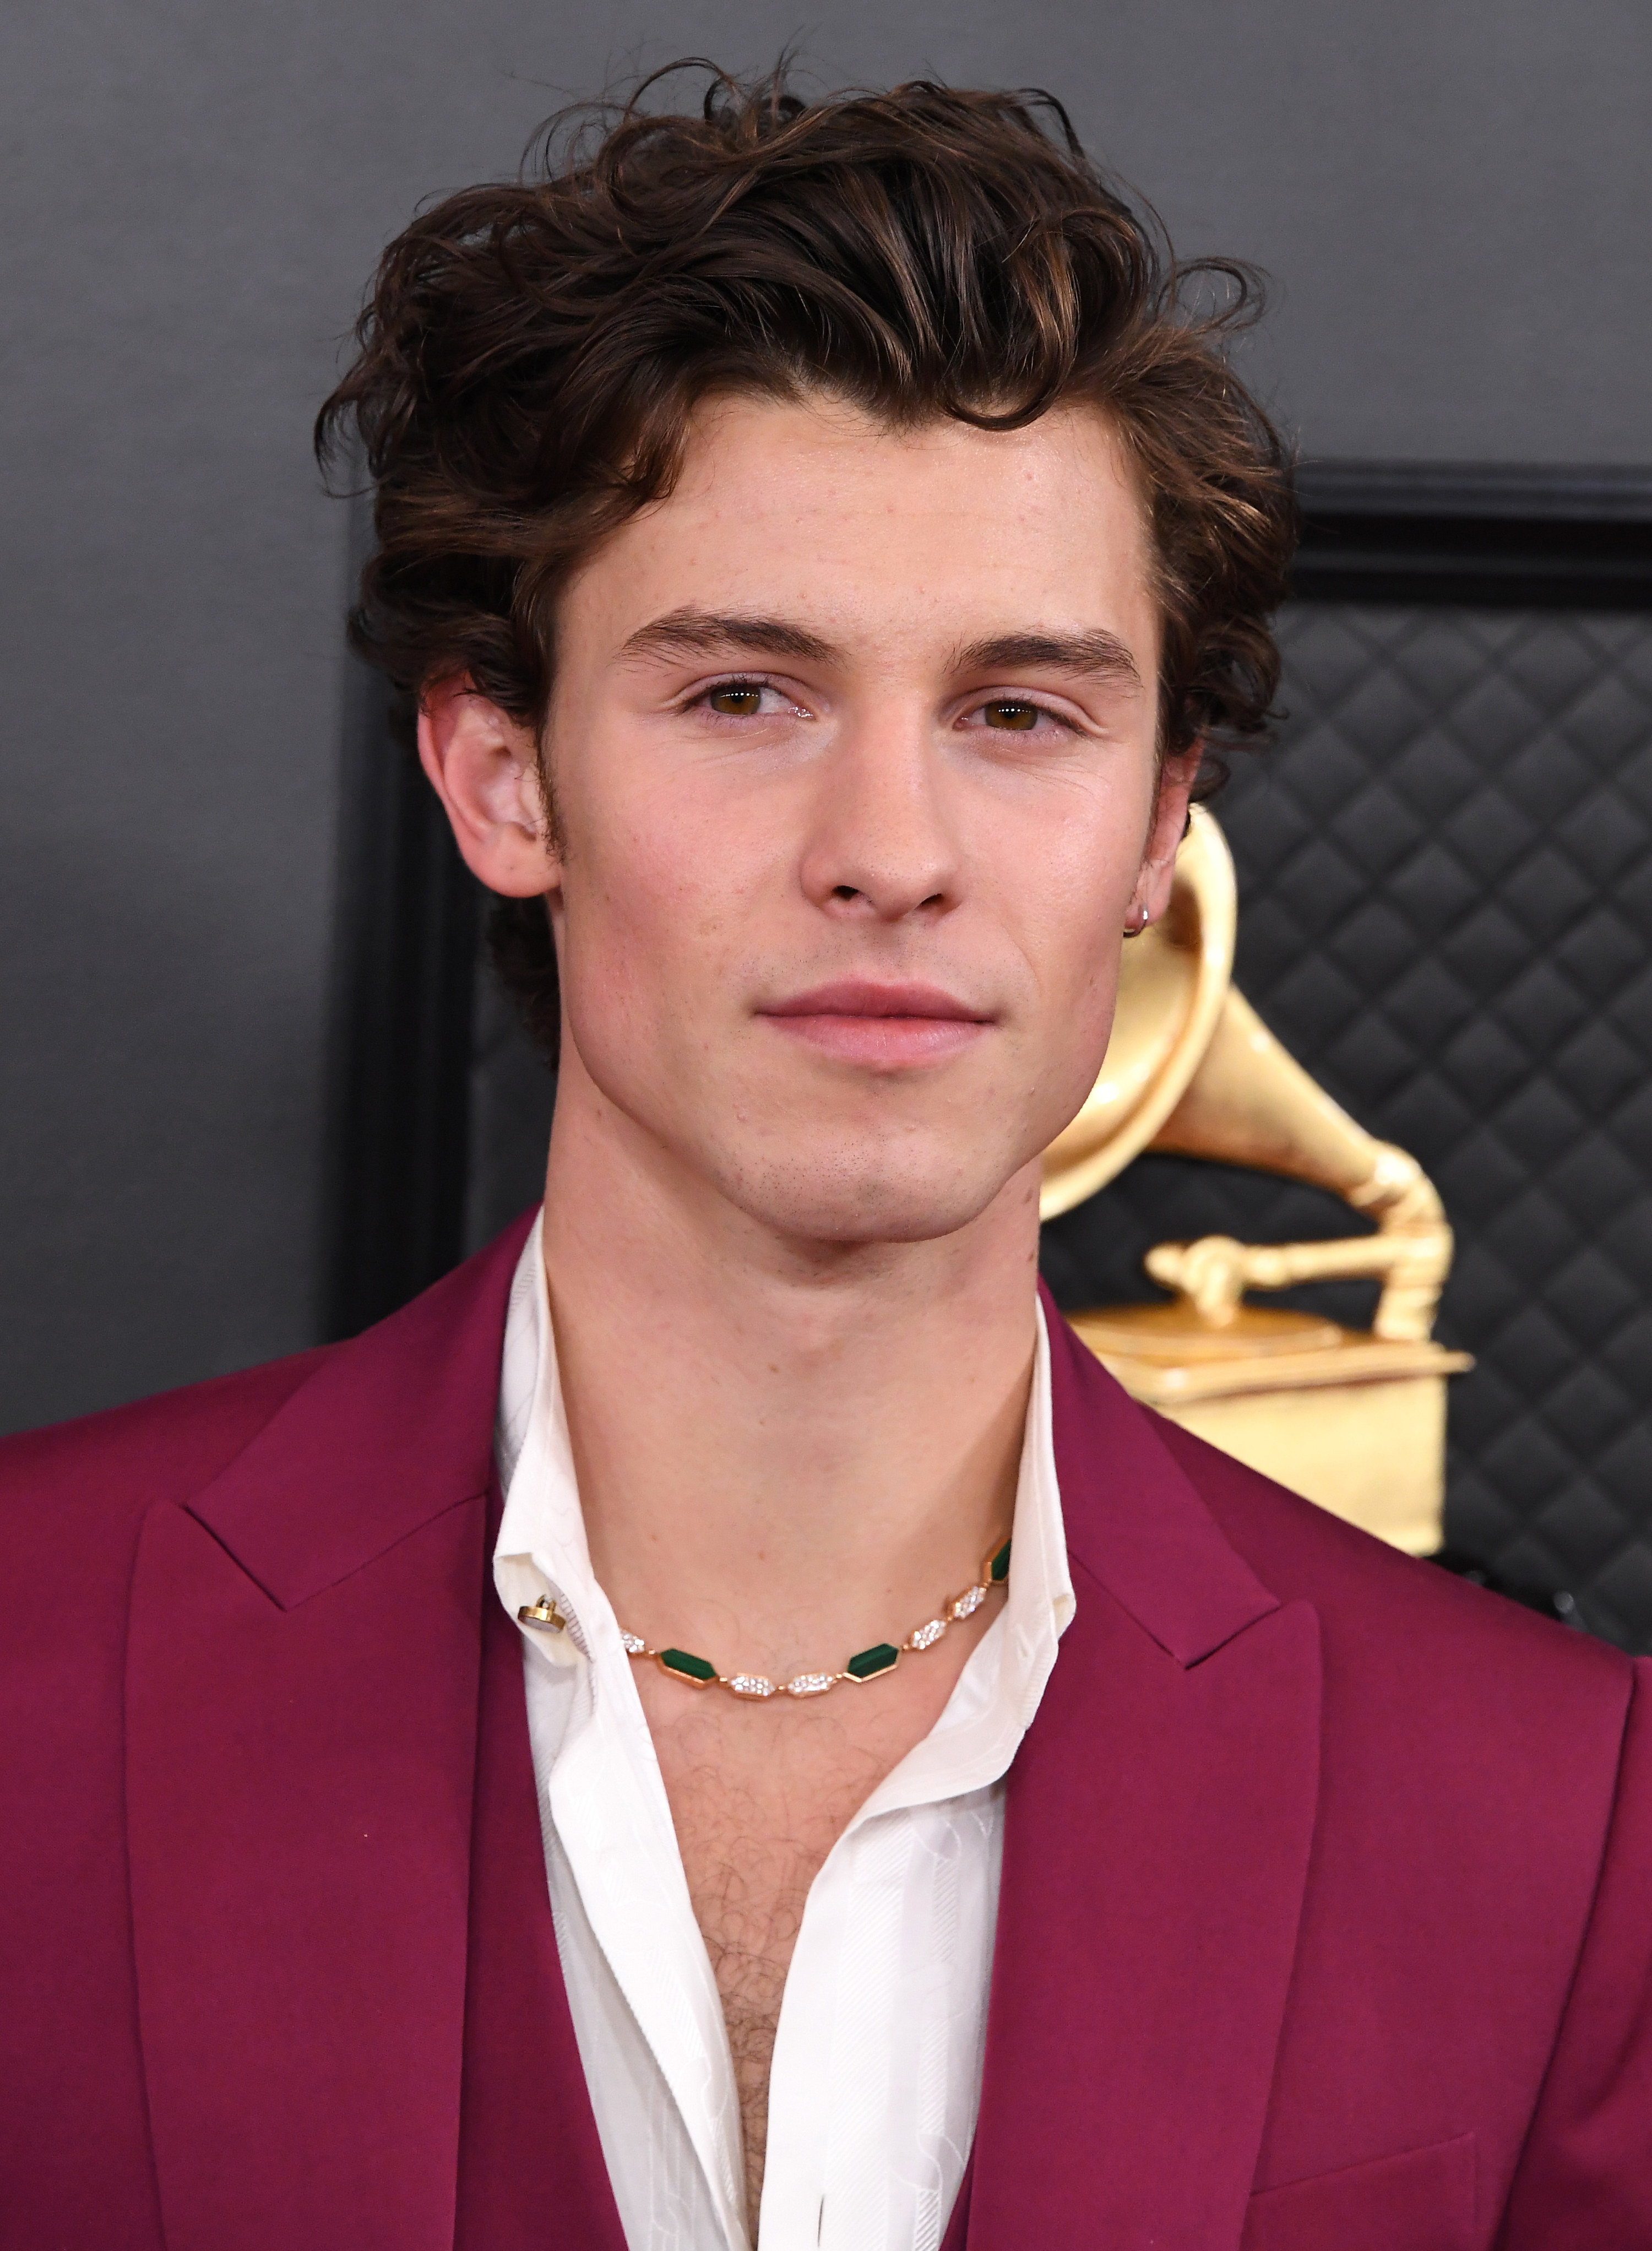 Shawn Mendes arrives at the 62nd Annual Grammy Awards in Los Angeles